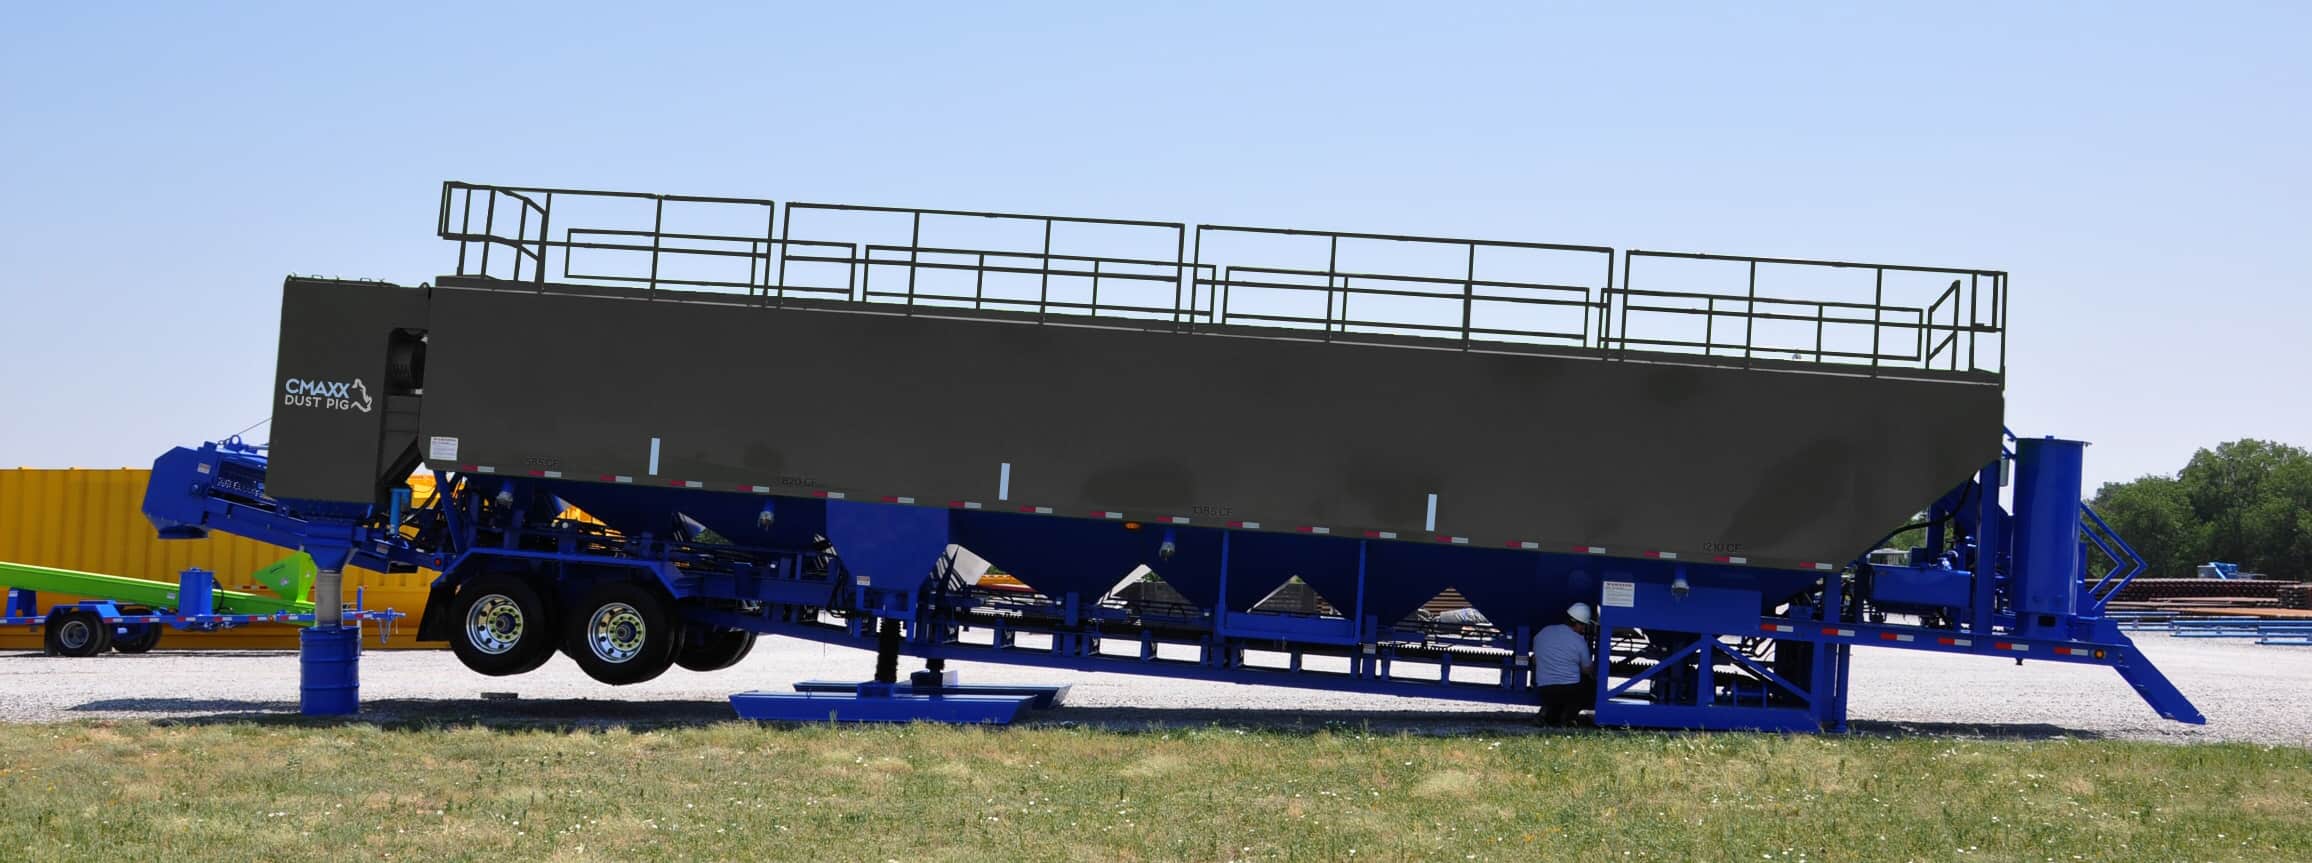 CMAXX Dust Pig installed on a sand storage truck that feeds a conveyor at a fracking worksite